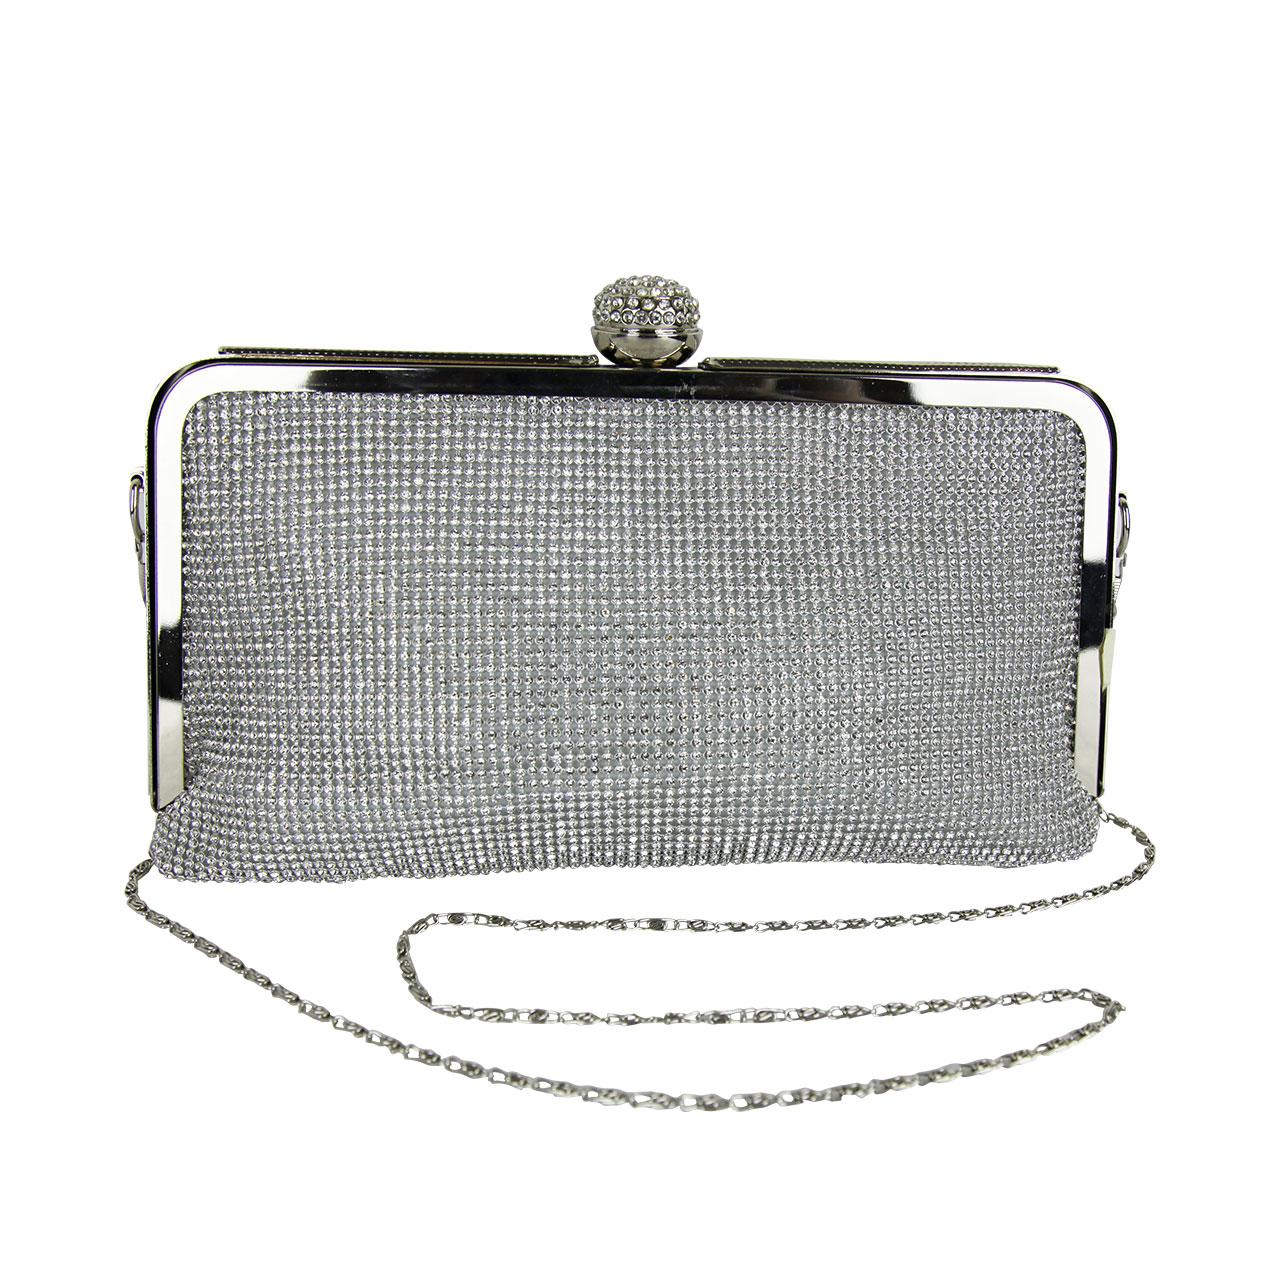 Women Sparkly Silver Purse Clutch Glitter Evening Bag With Chain